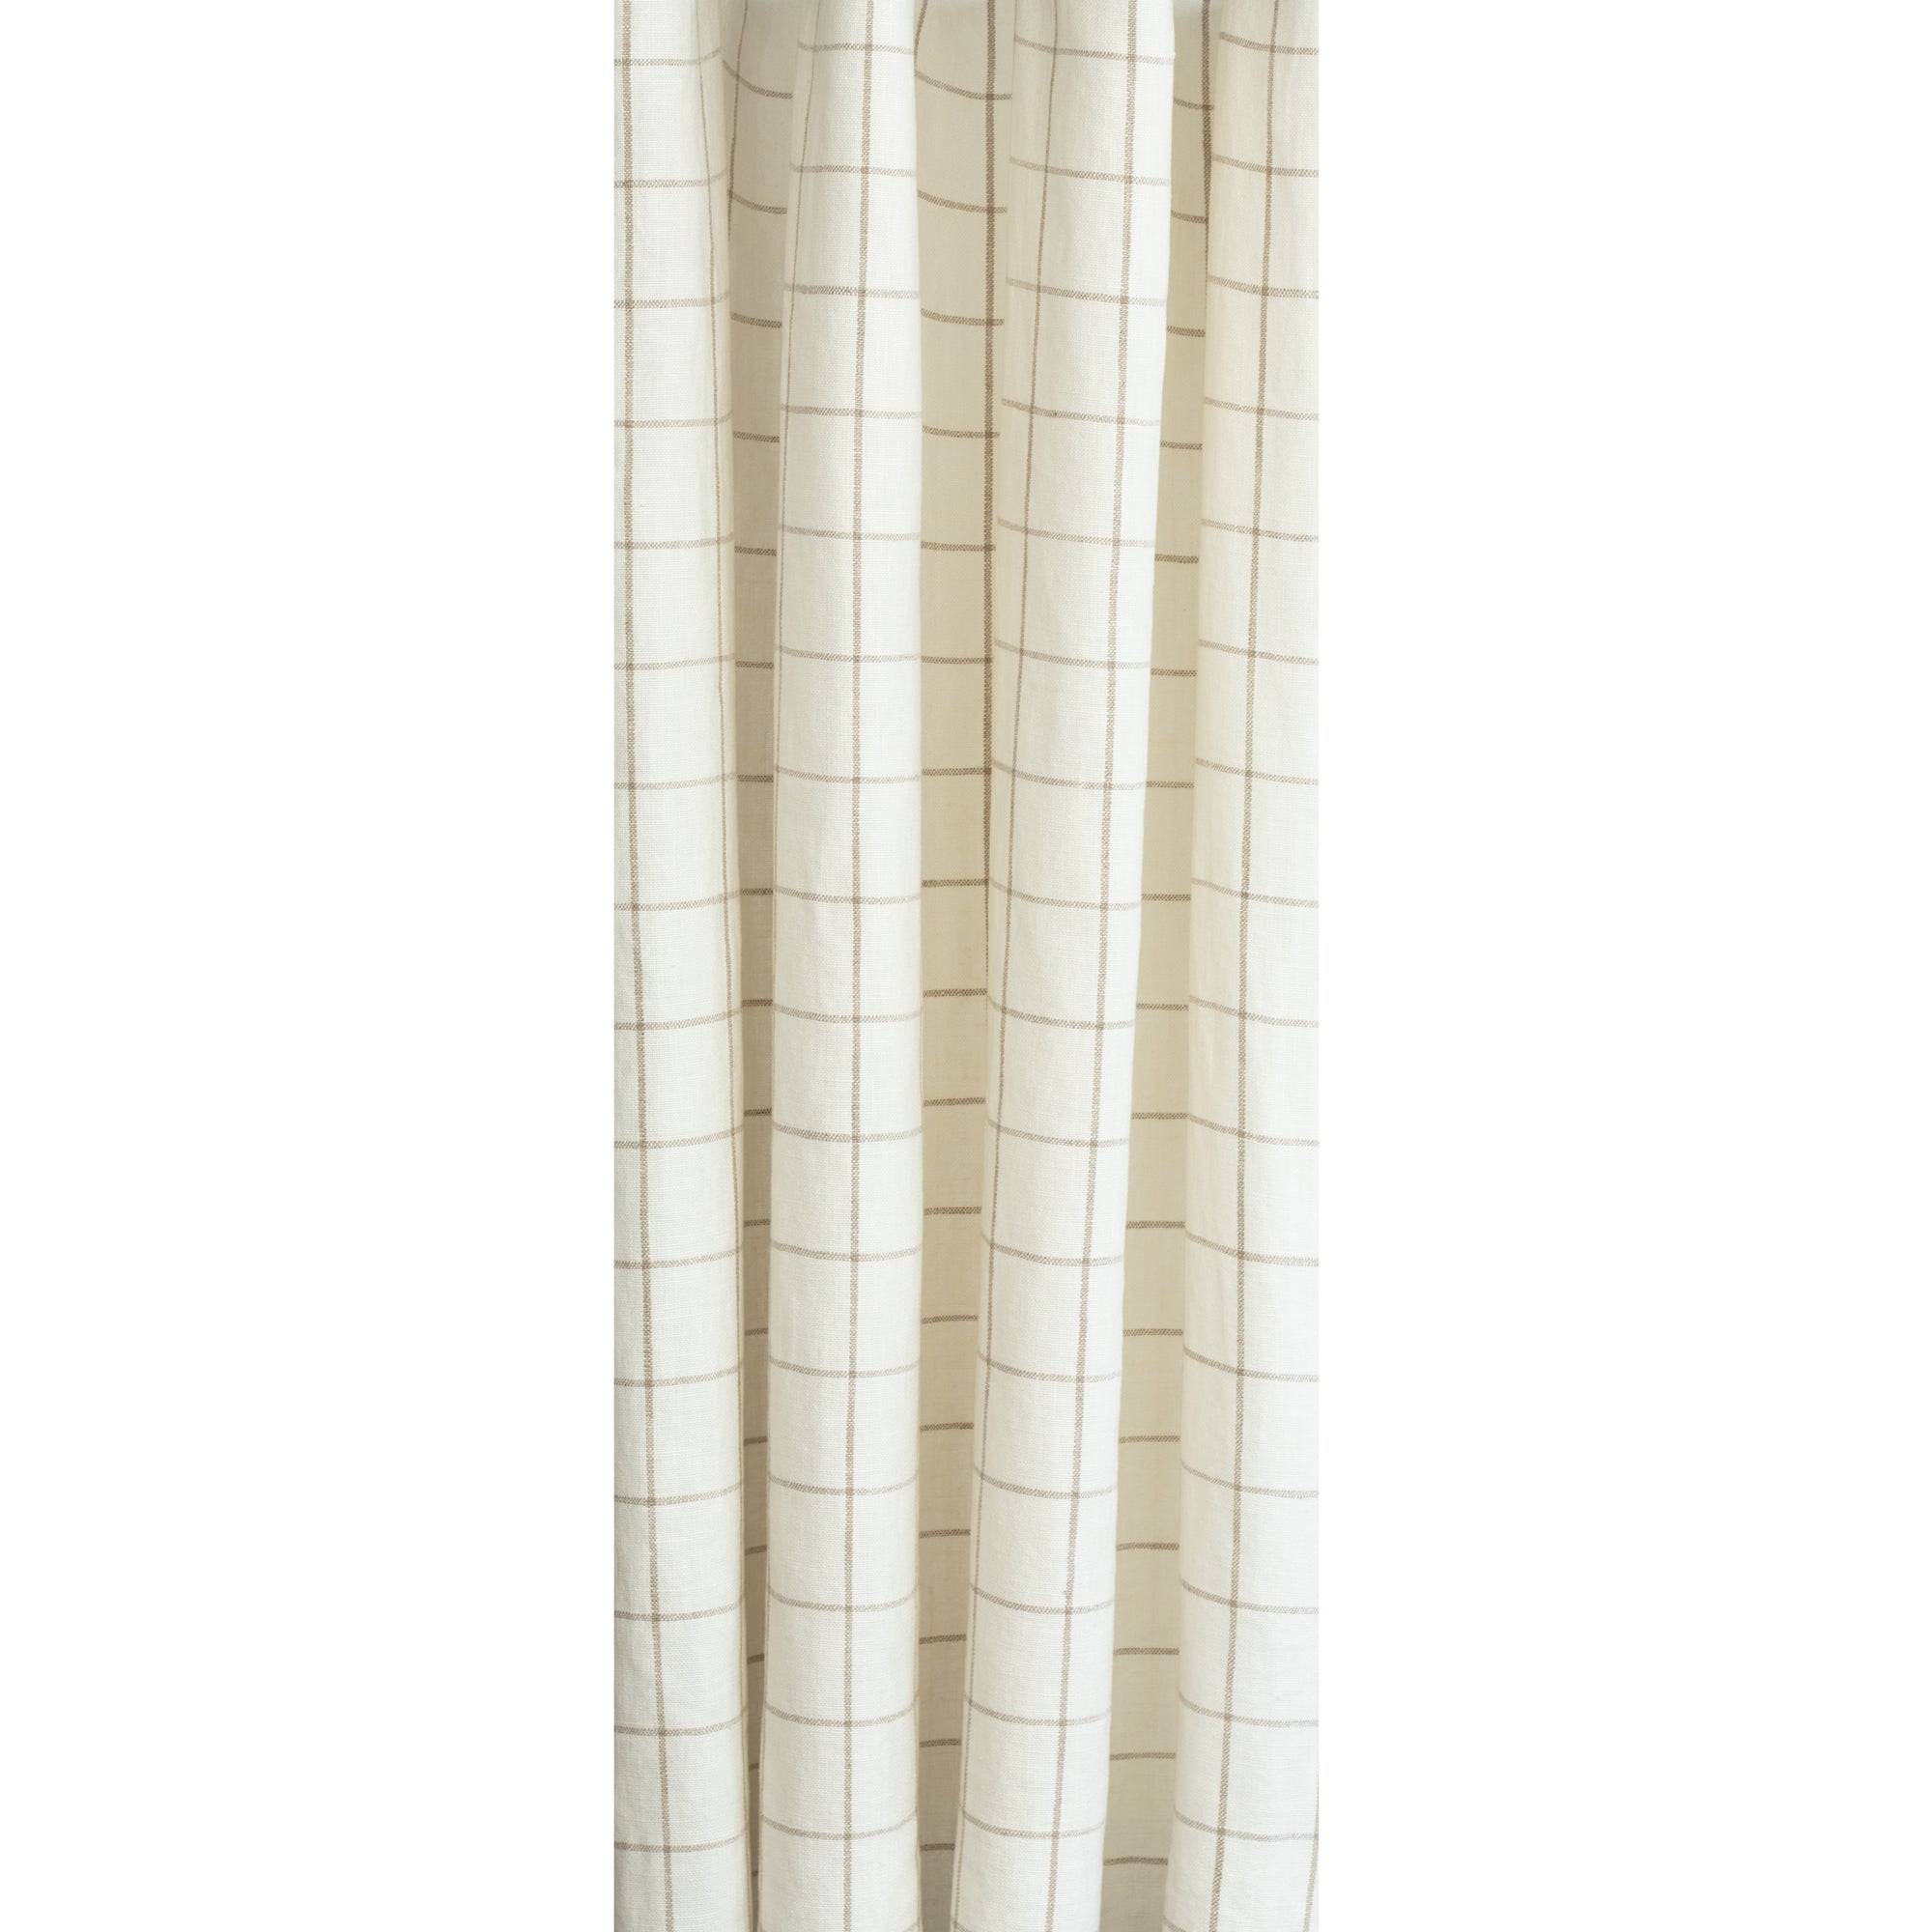 Butler check cream and beige windowpane linen drapery fabric from Tonic Living